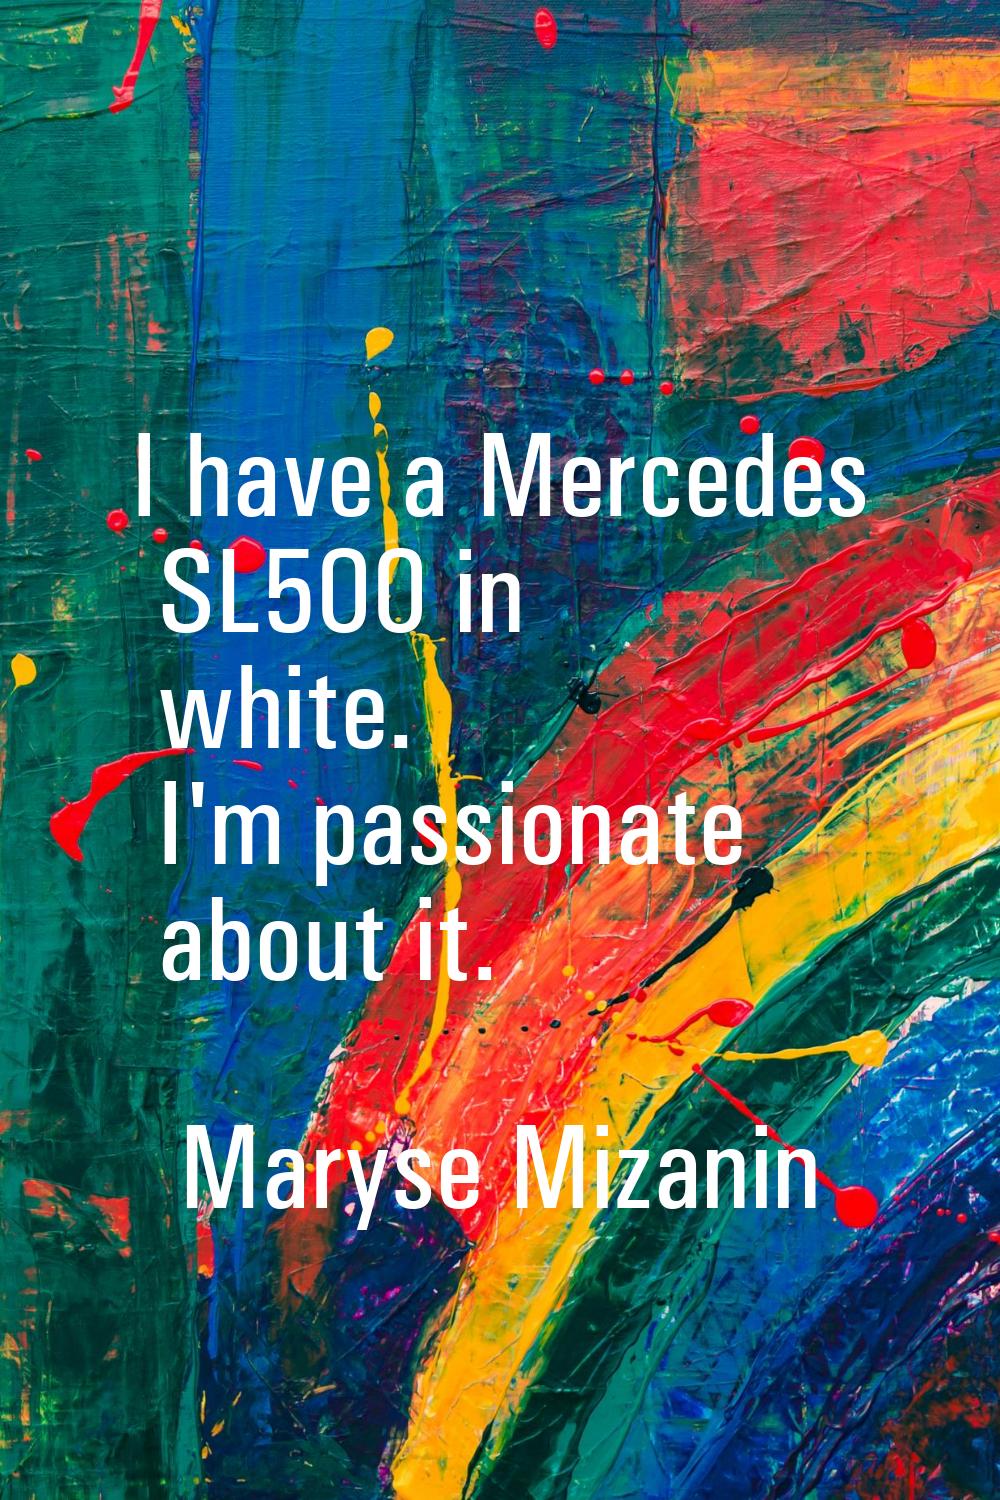 I have a Mercedes SL500 in white. I'm passionate about it.